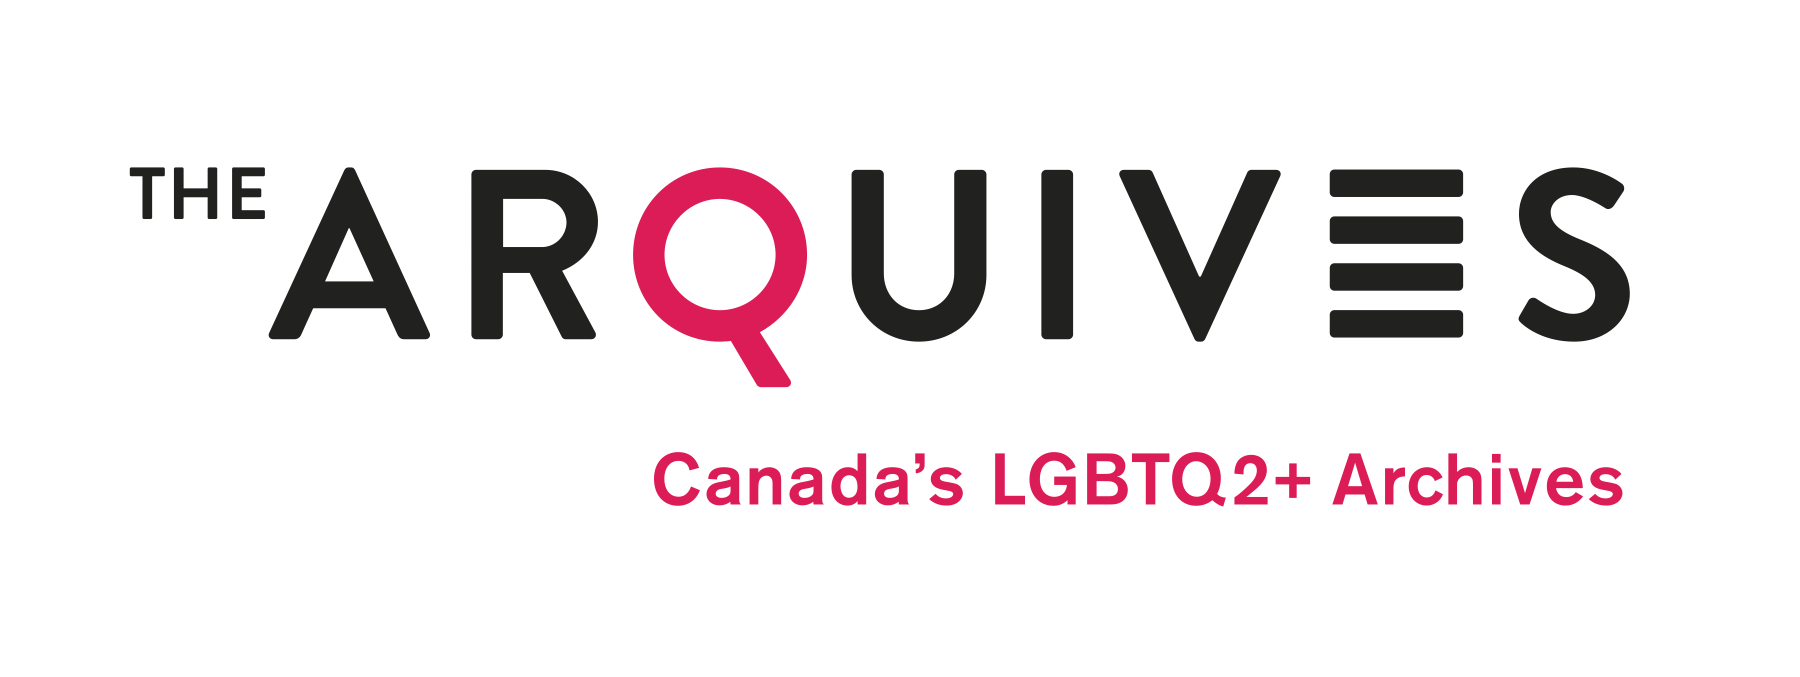 The ArQuives: Canada's LGBTQ2+ Archives Logo